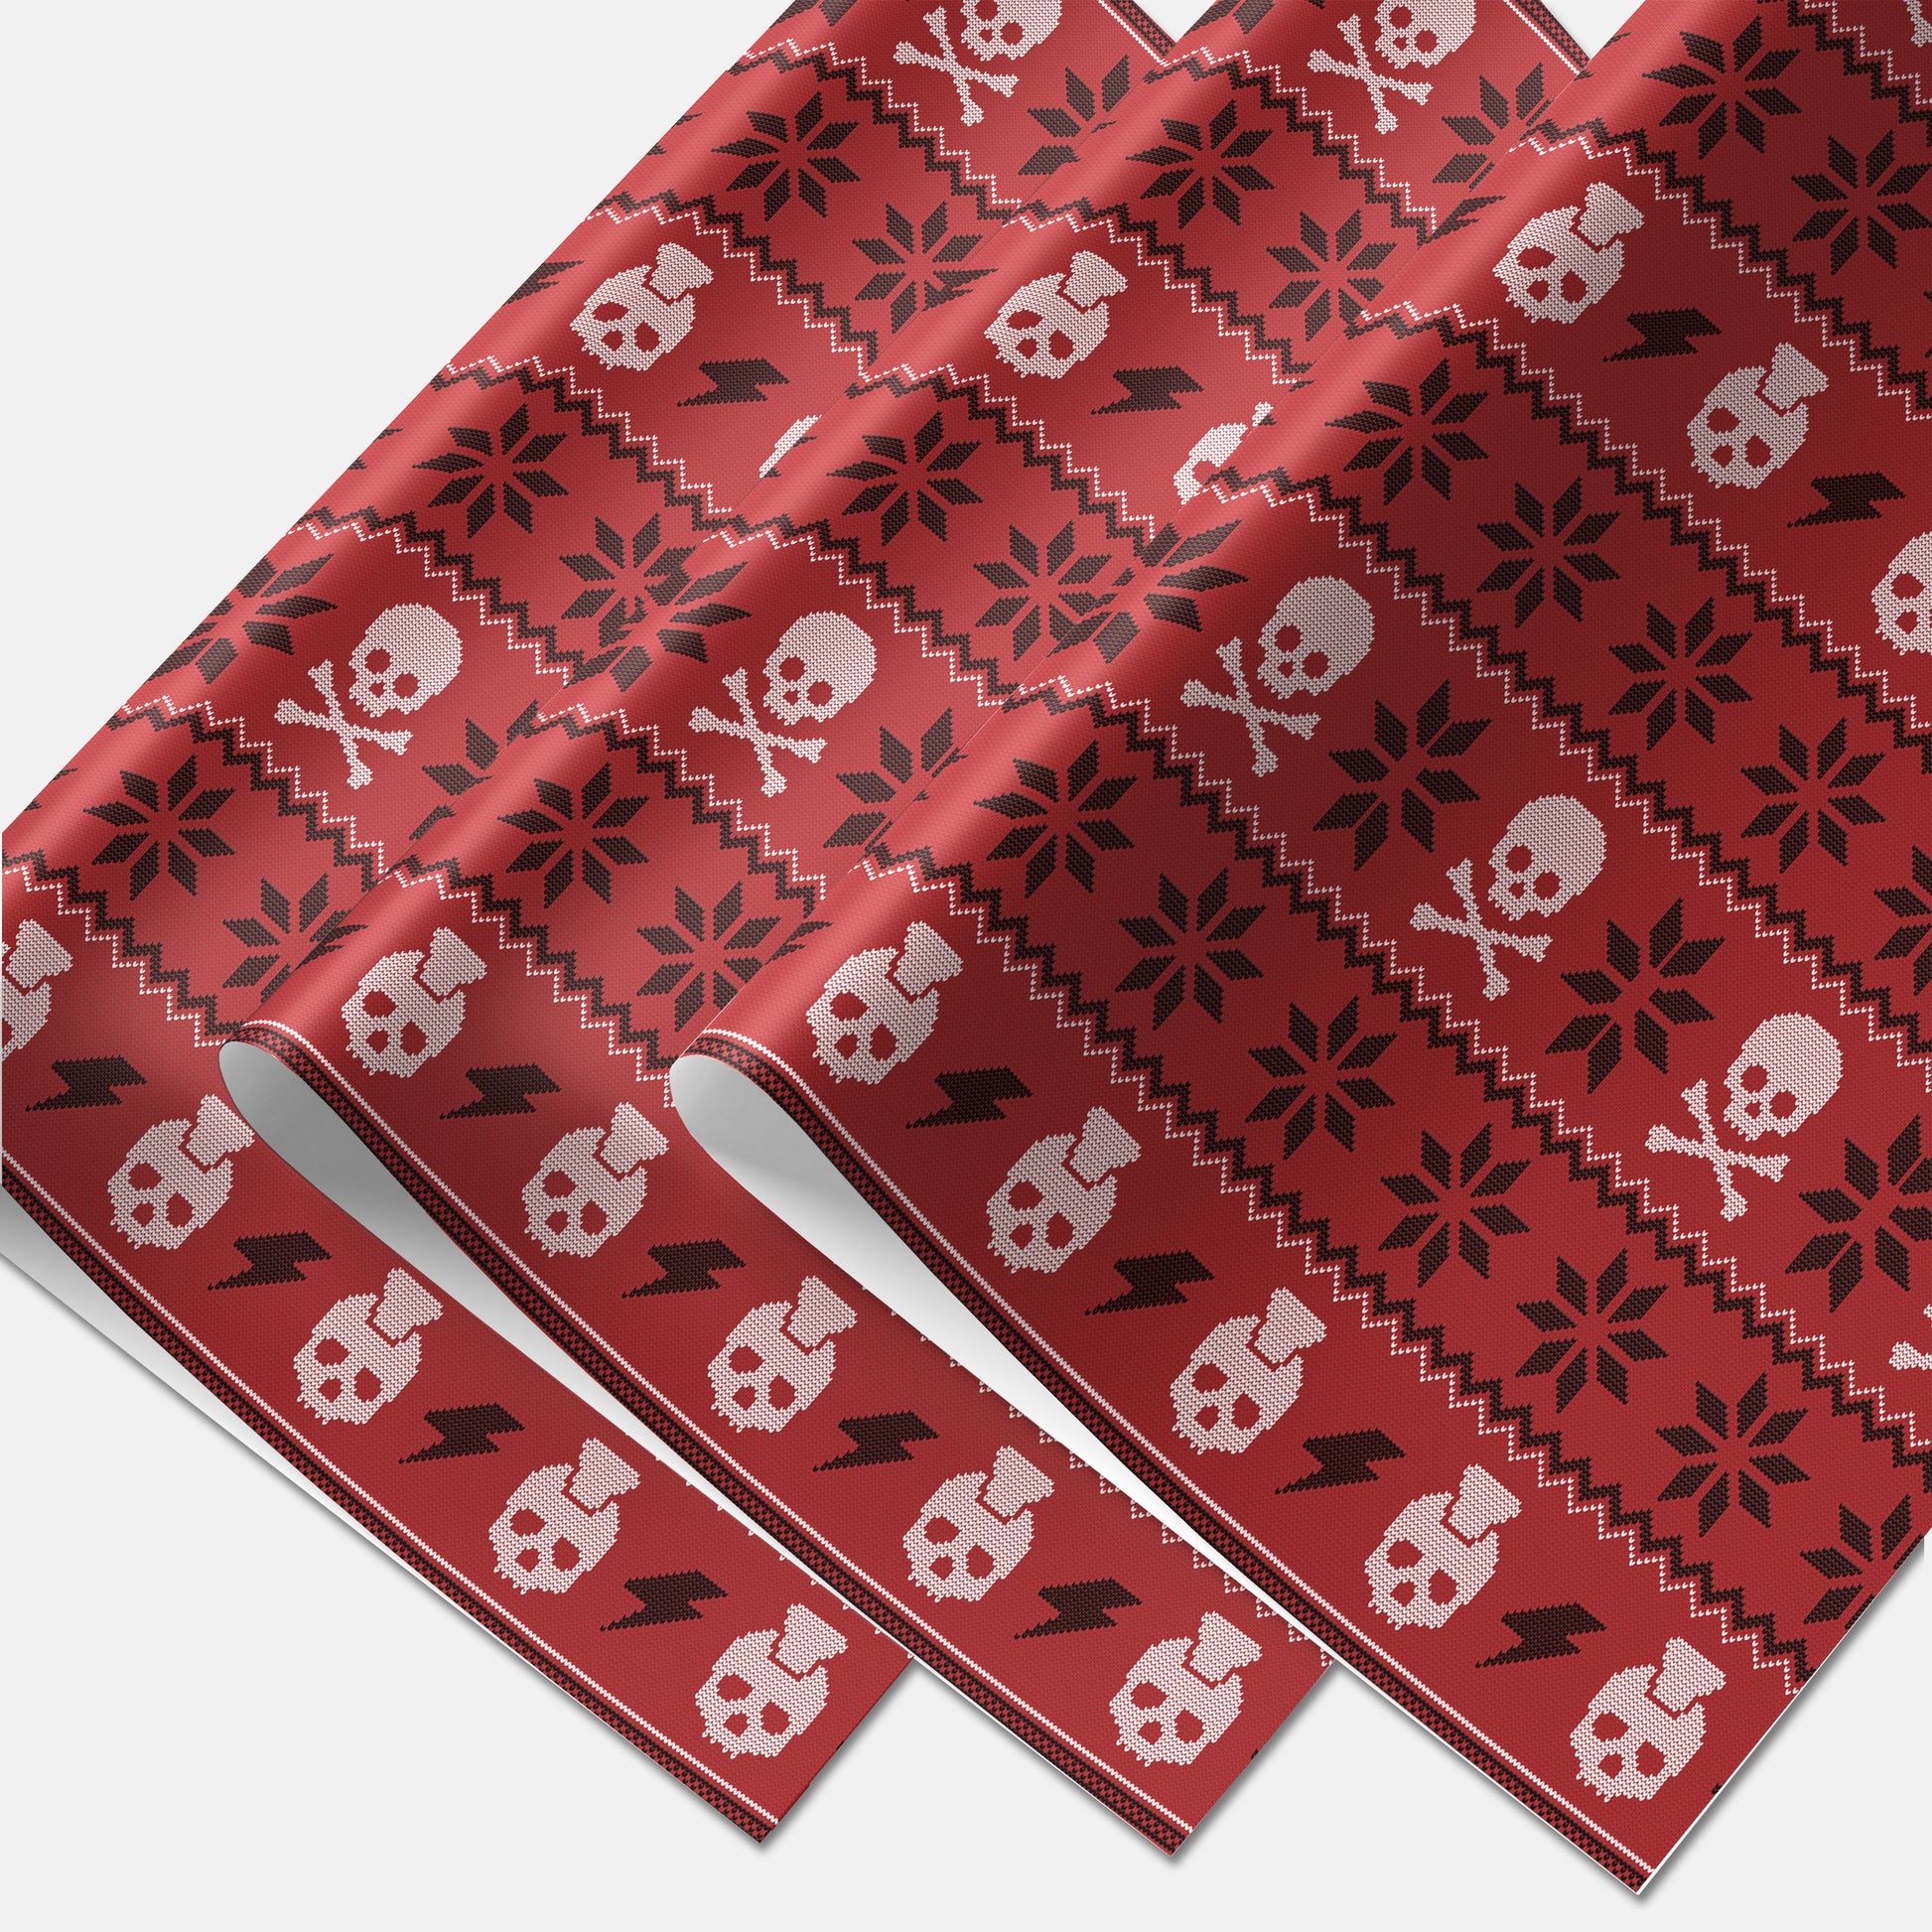 mohawk skull 3 sheets of wrapping paper